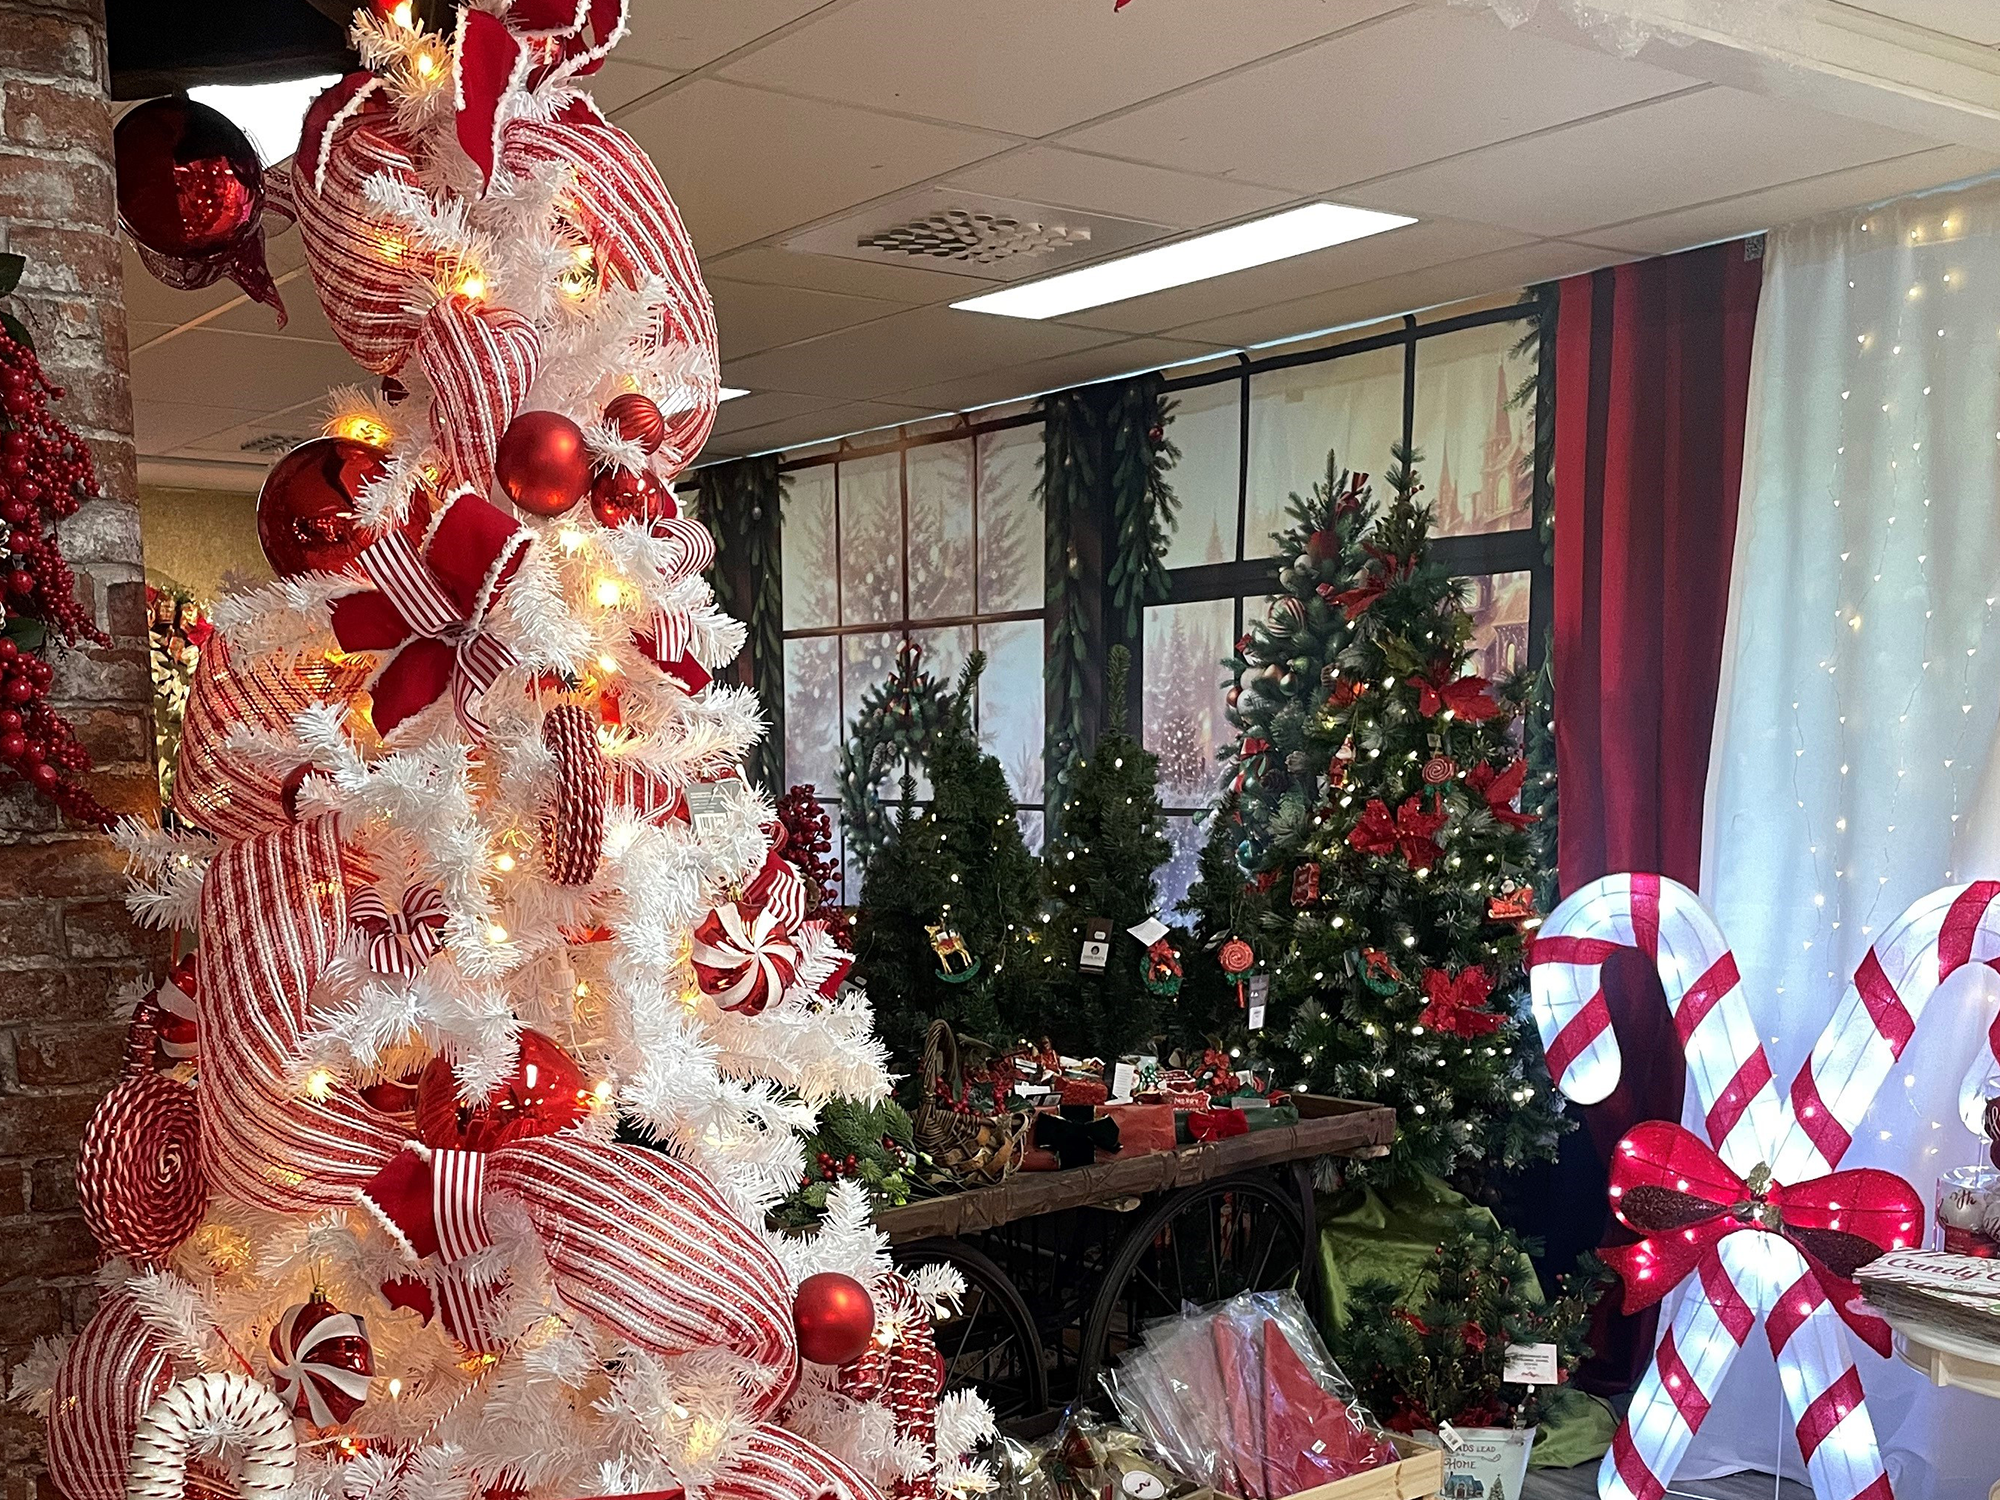 Christmas store with a large white Christmas tree filled with red adornments, a Santa Claus doll, two candy canes, among other Christmassy decoration pieces